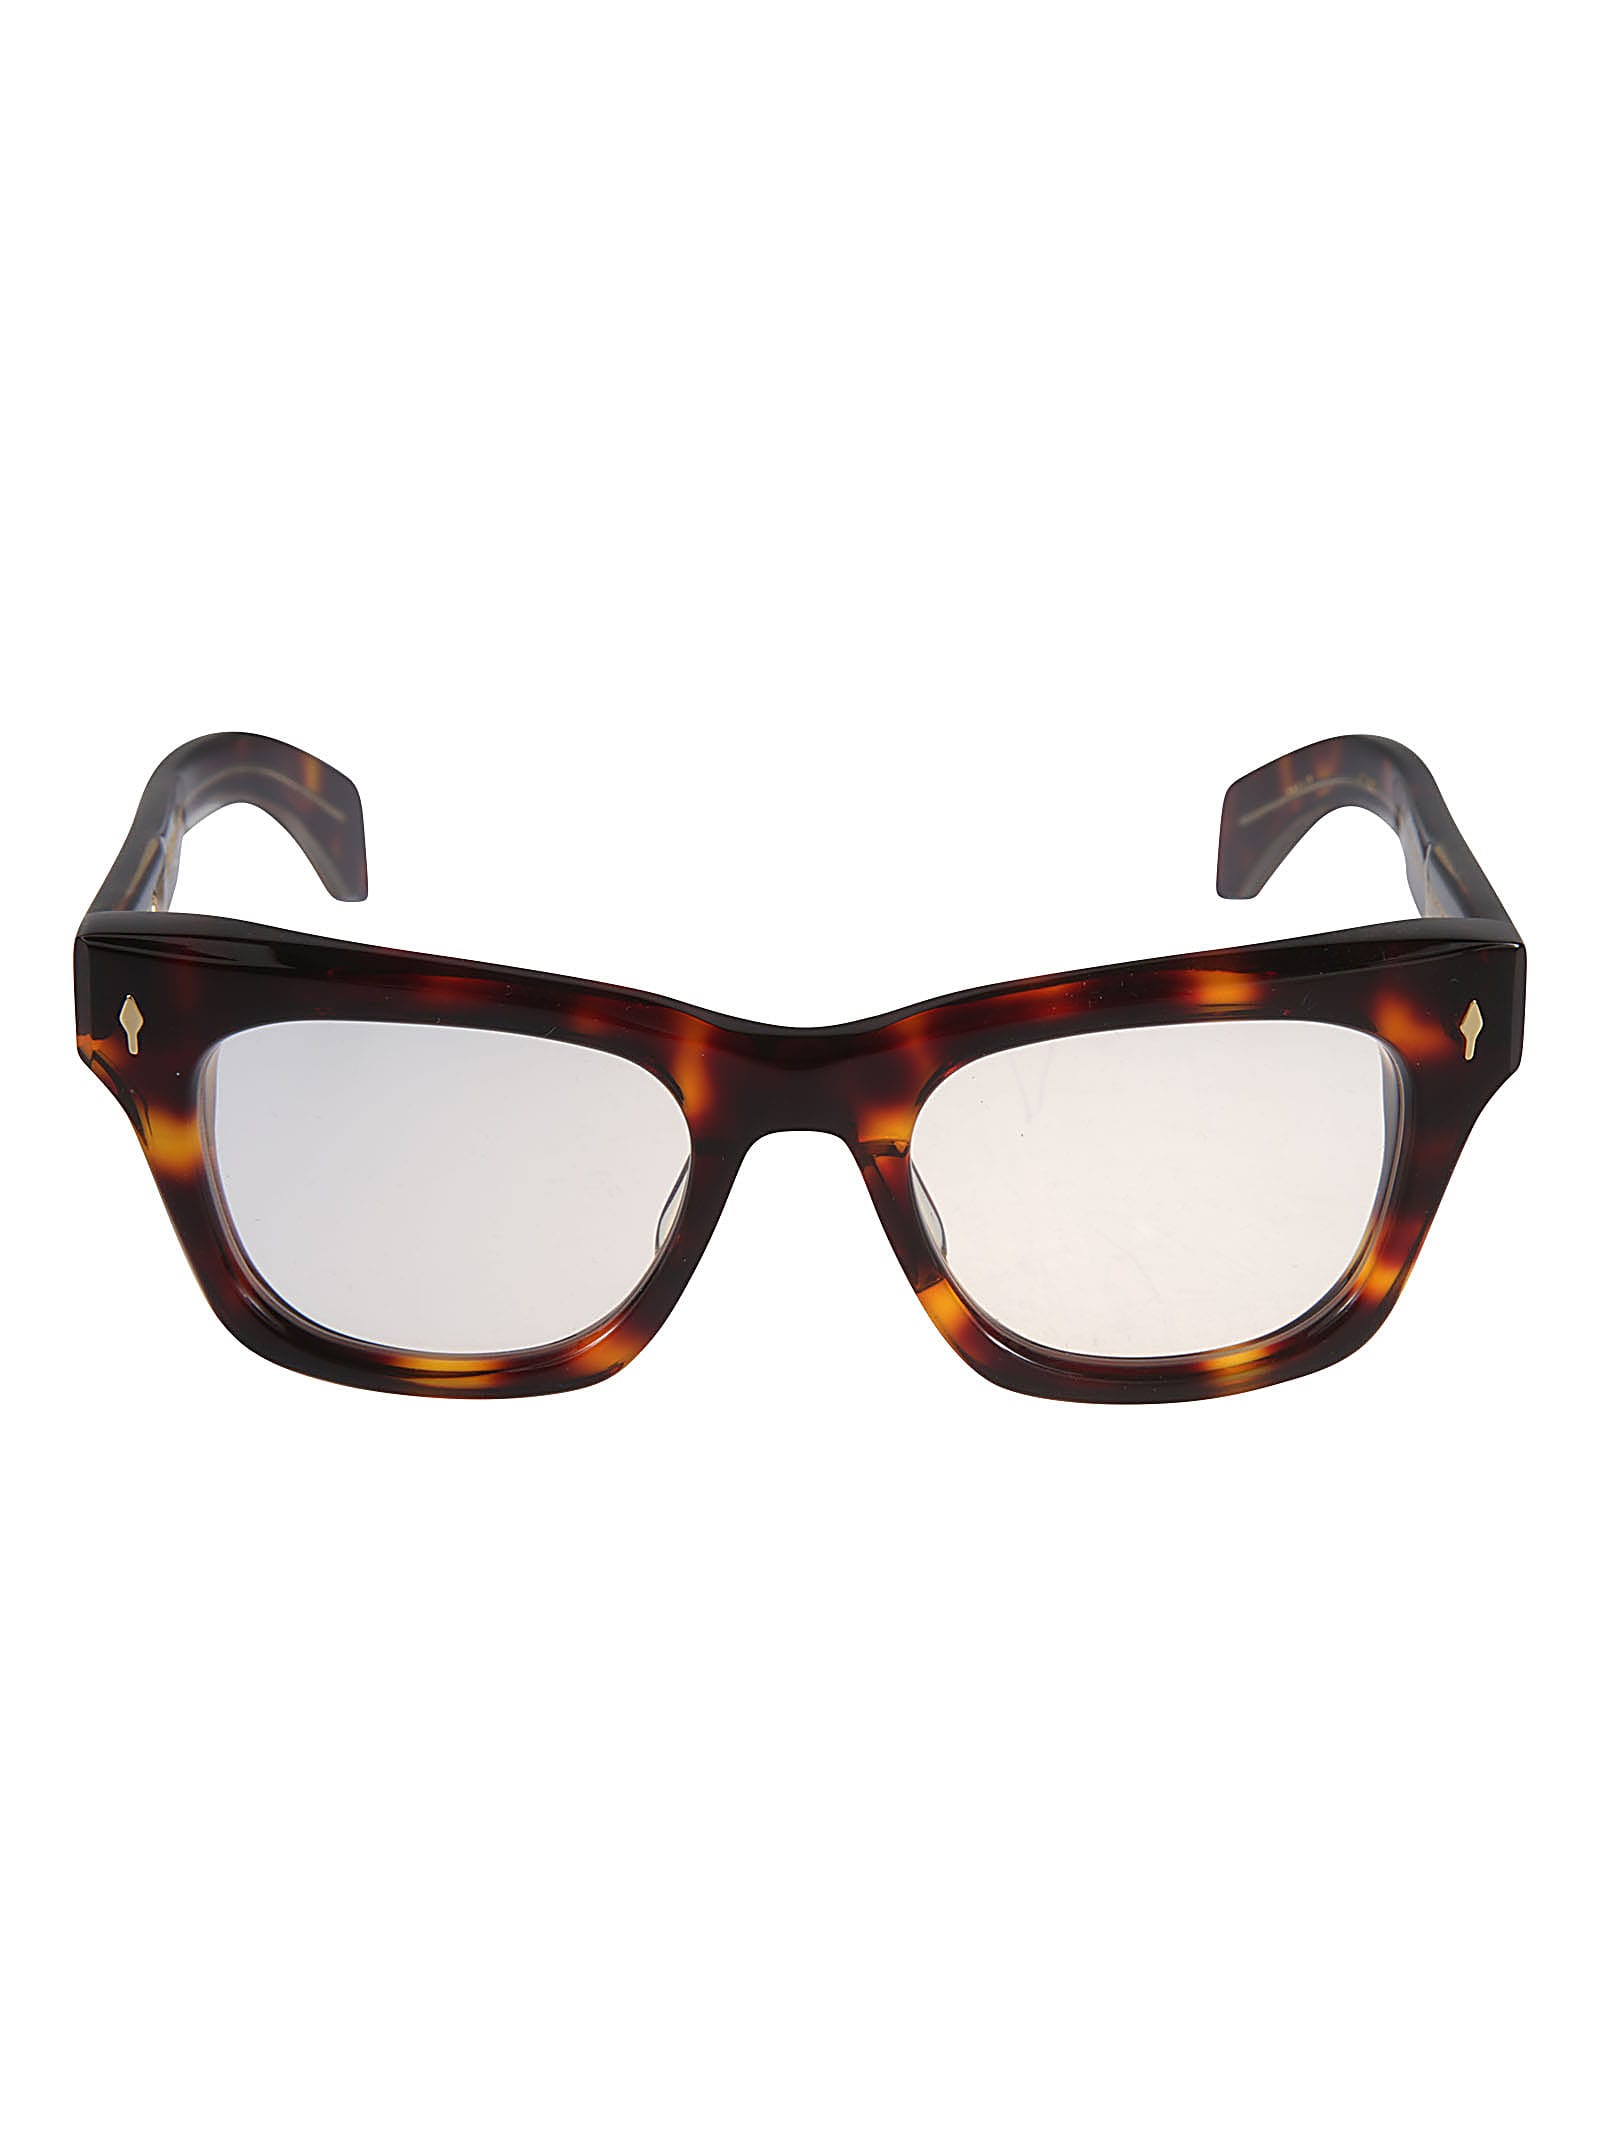 Jacques Marie Mage Logo Detail Frame In Brown/black